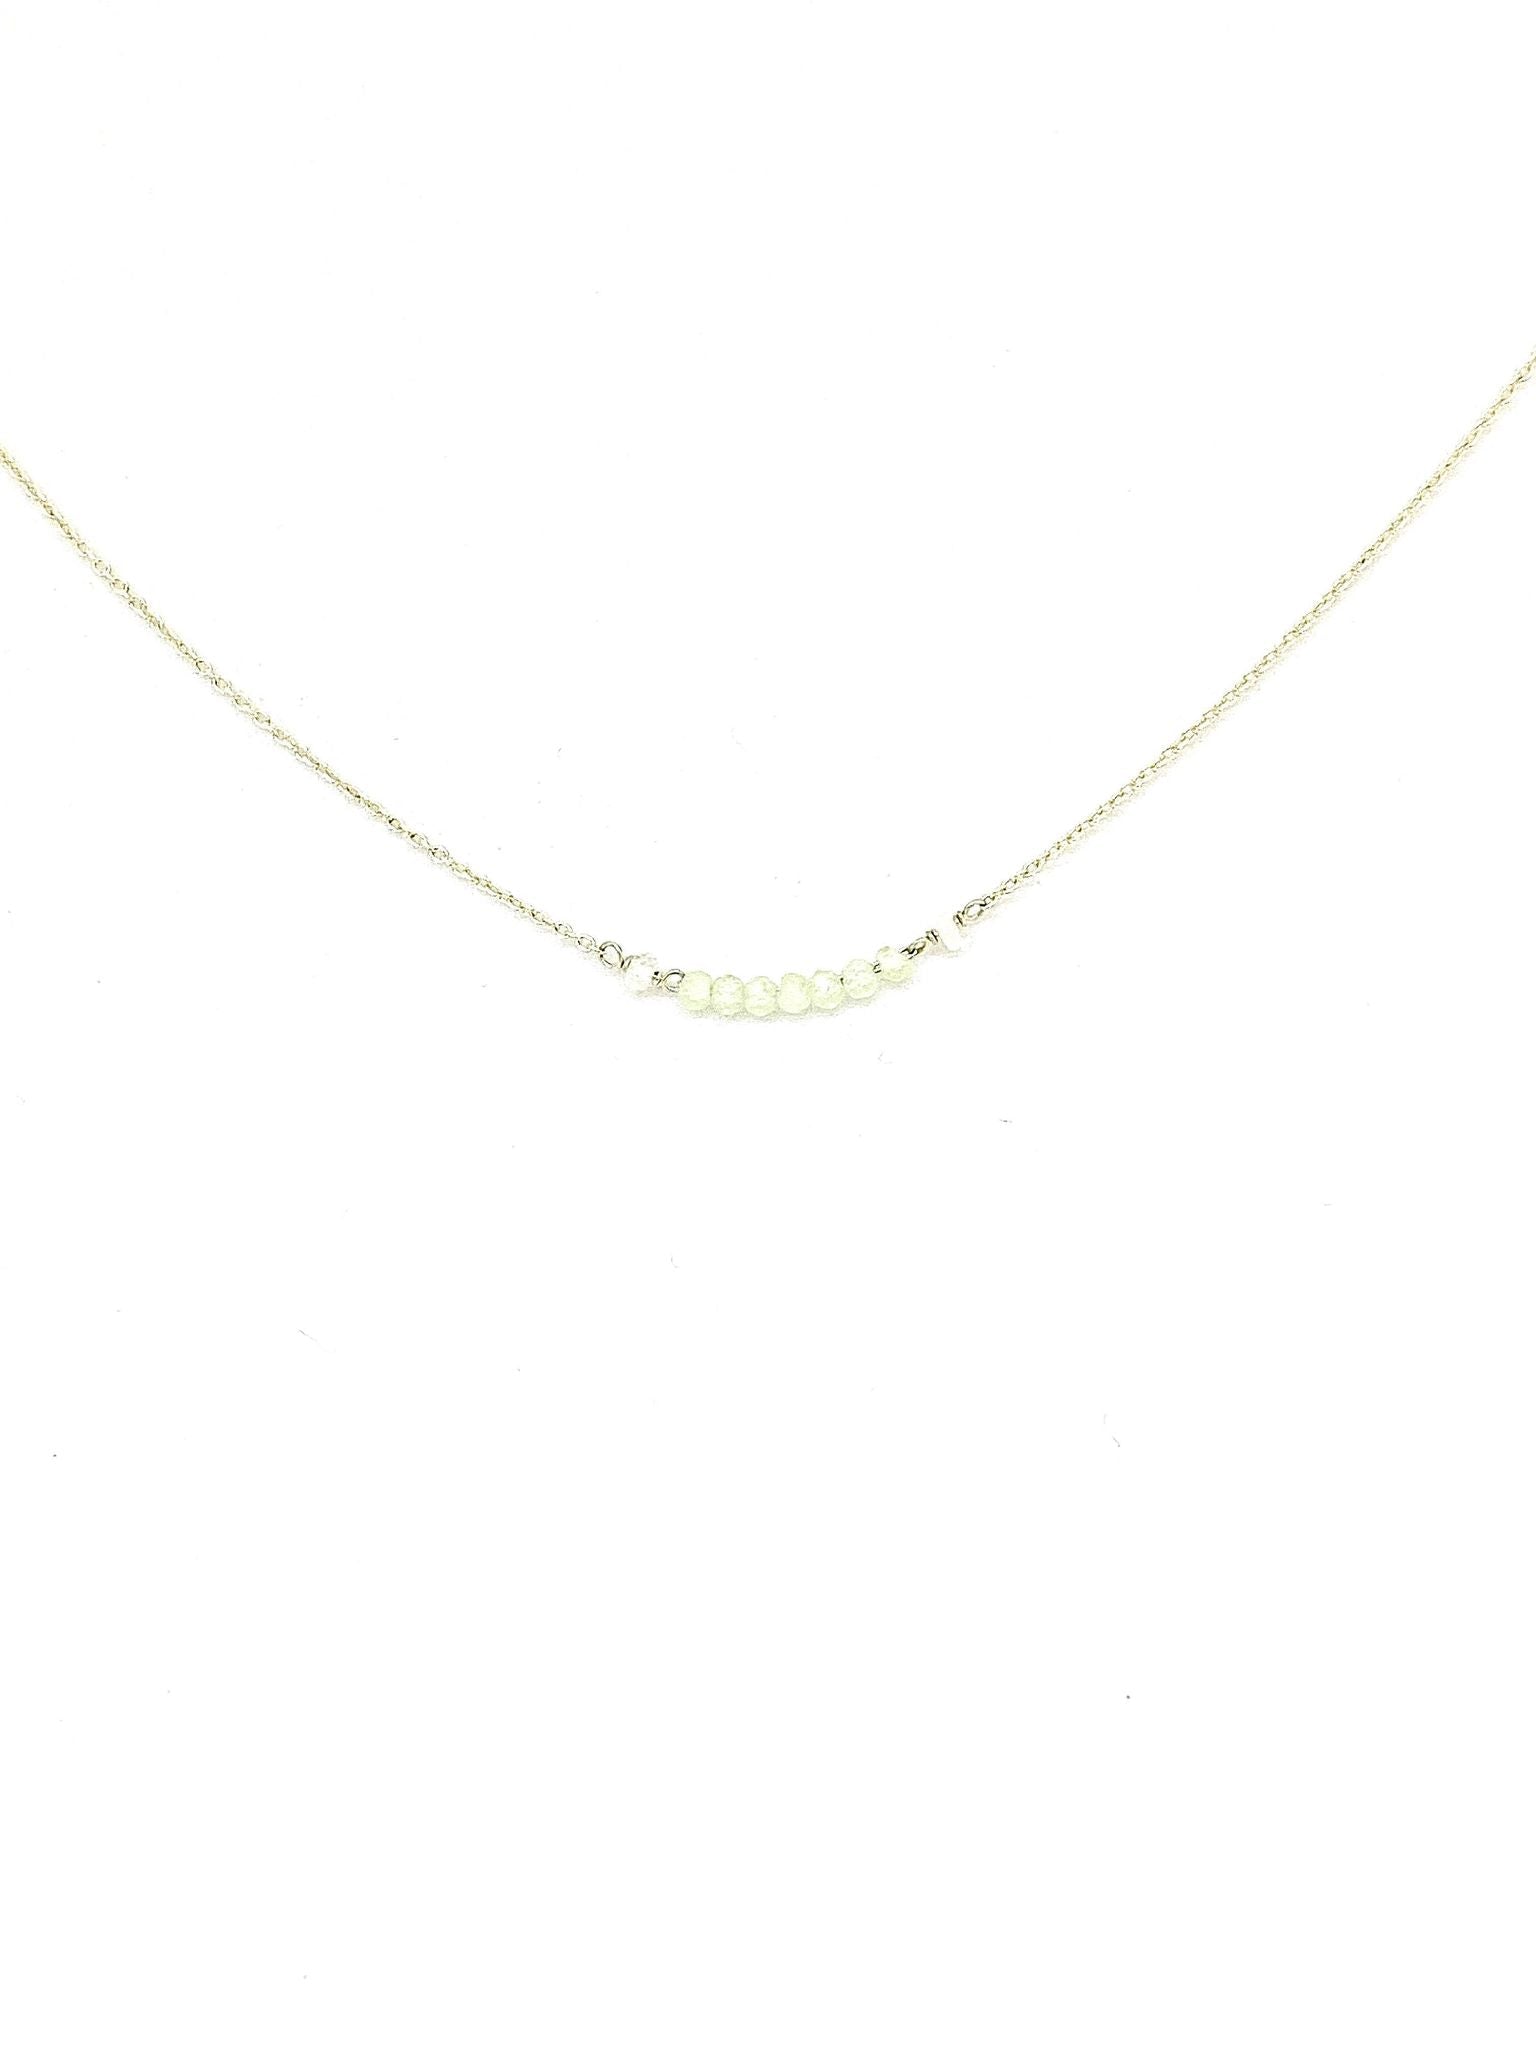 I Am Protected Necklace | Prehnite - The Wong Way